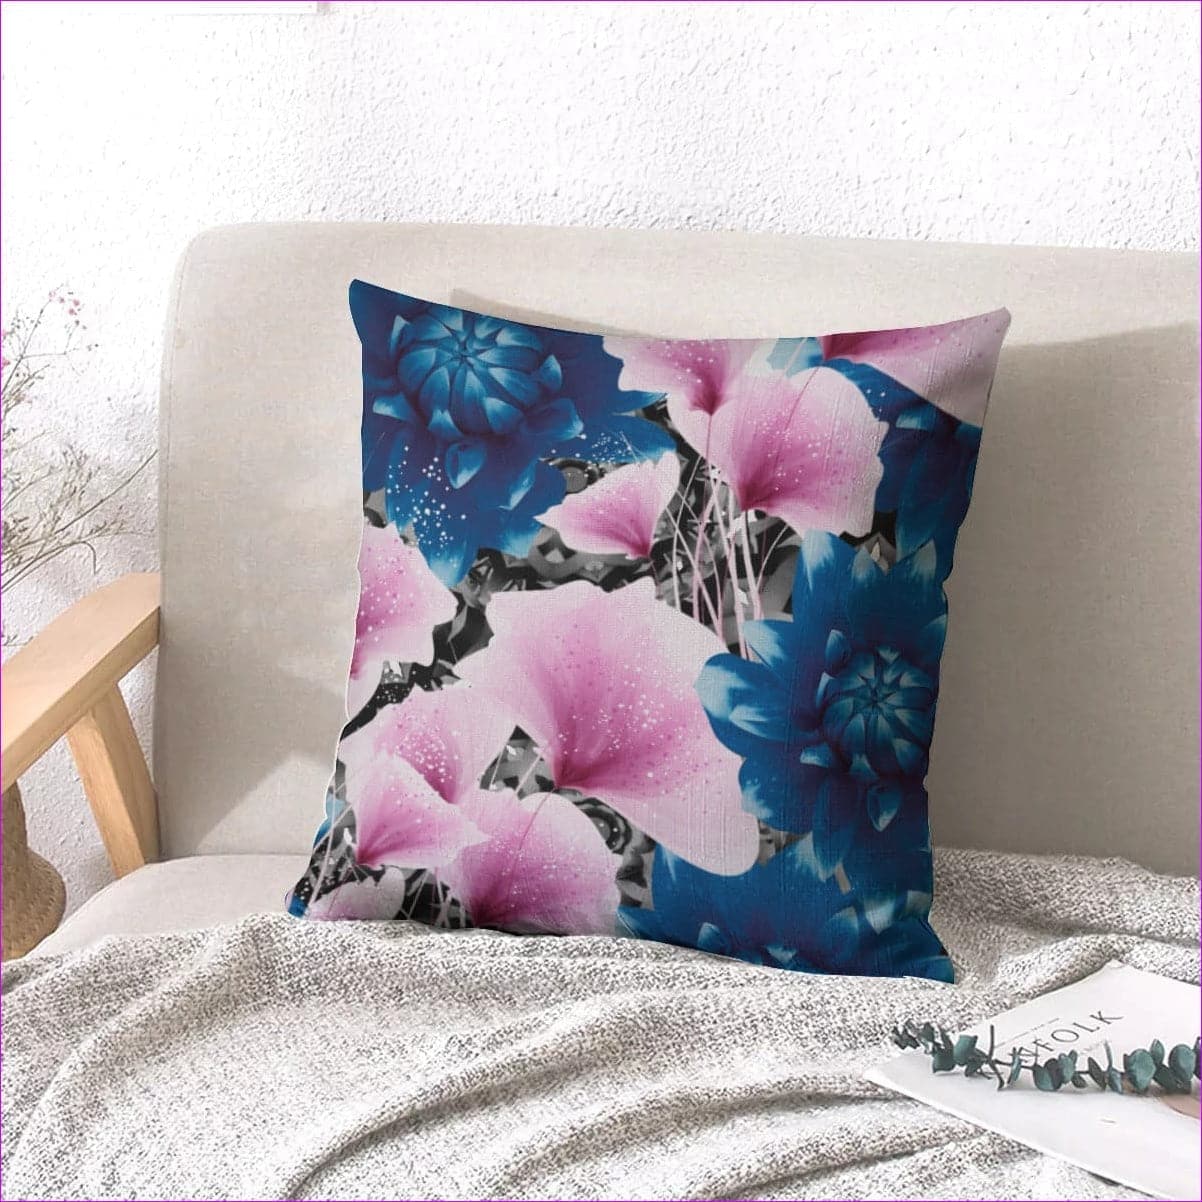 Blue Floral Realm Couch pillow with pillow Inserts | linen type fabric - throw pillow at TFC&H Co.